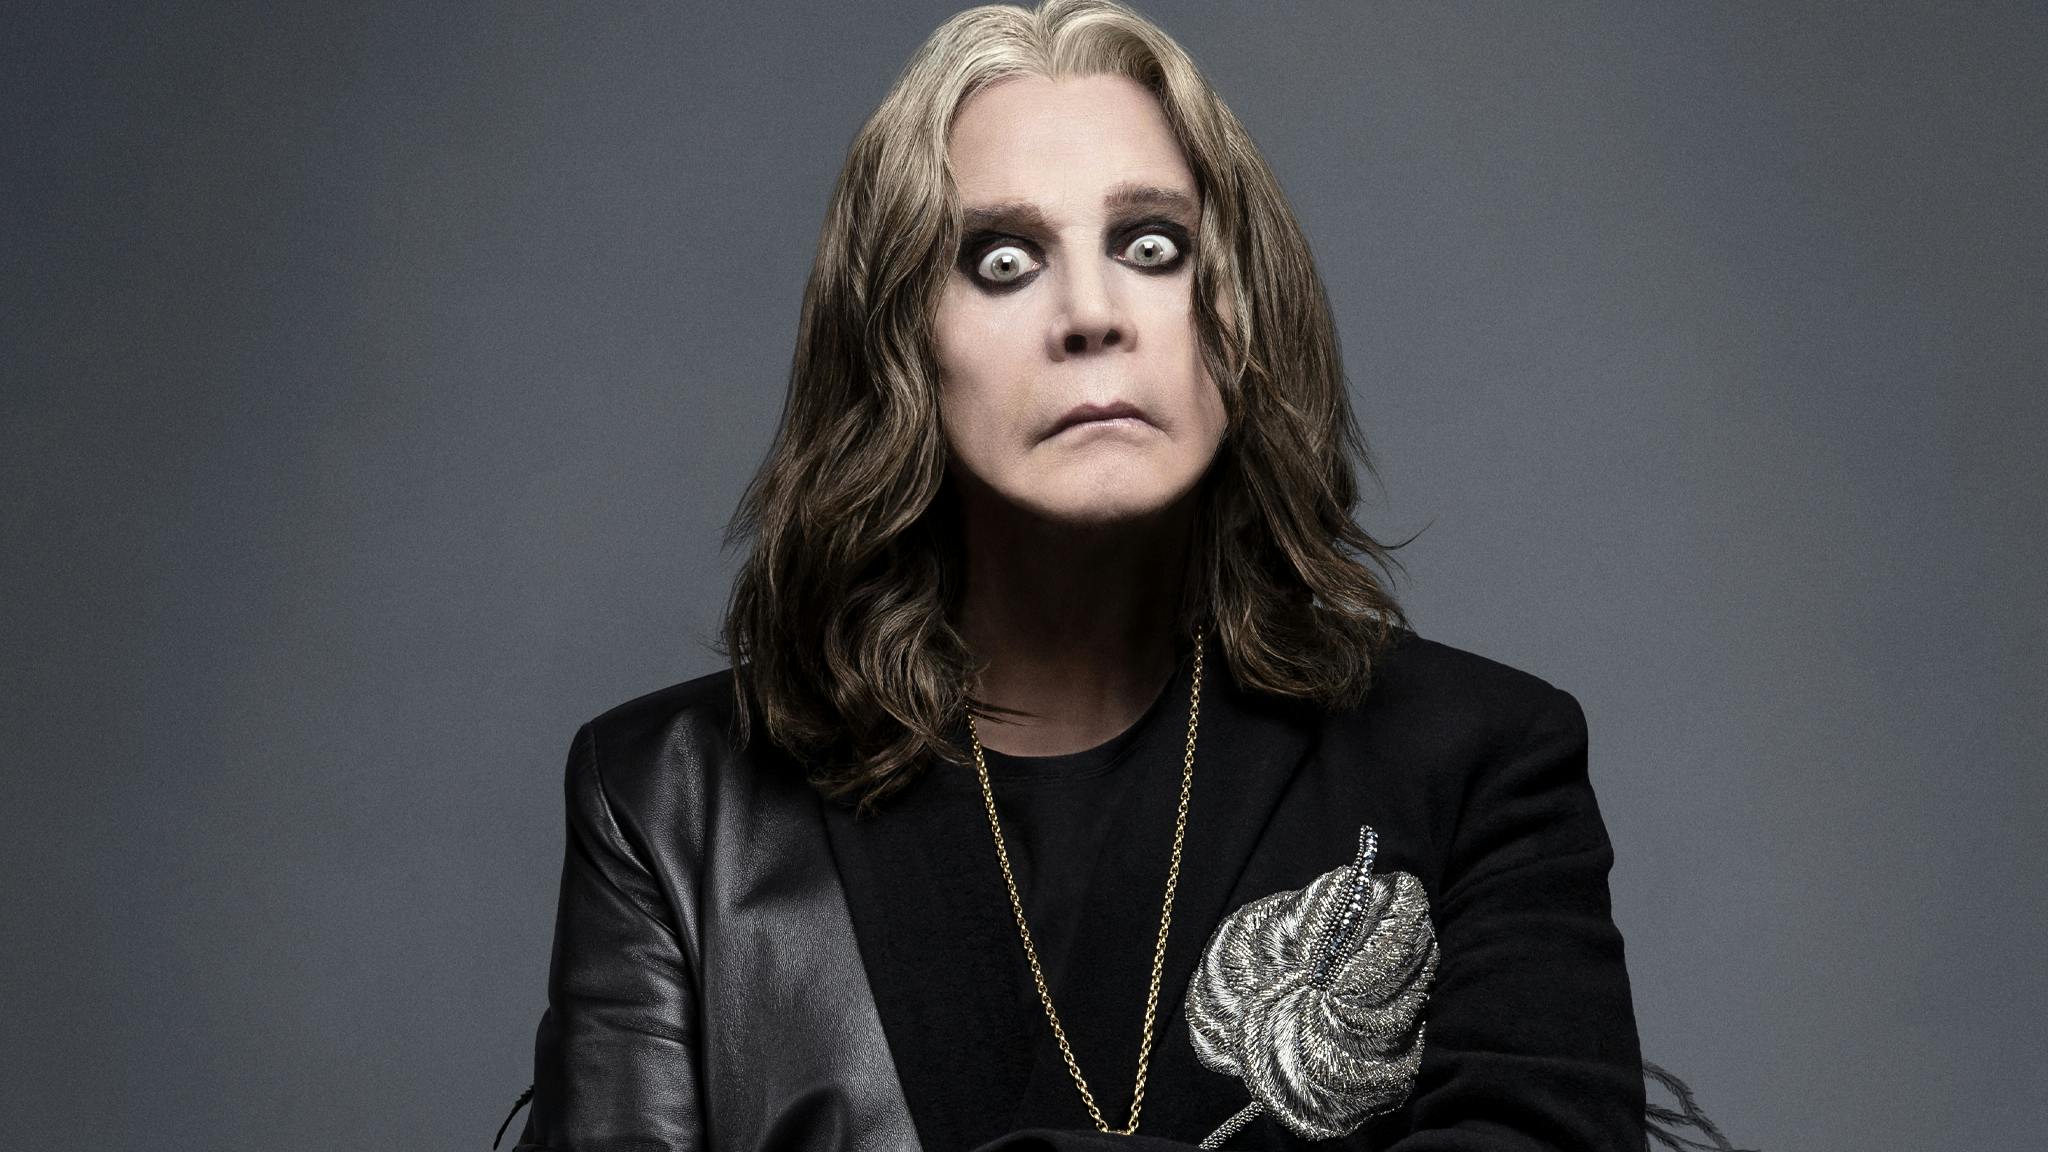 Sharon Osbourne says Ozzy is “doing so much better”